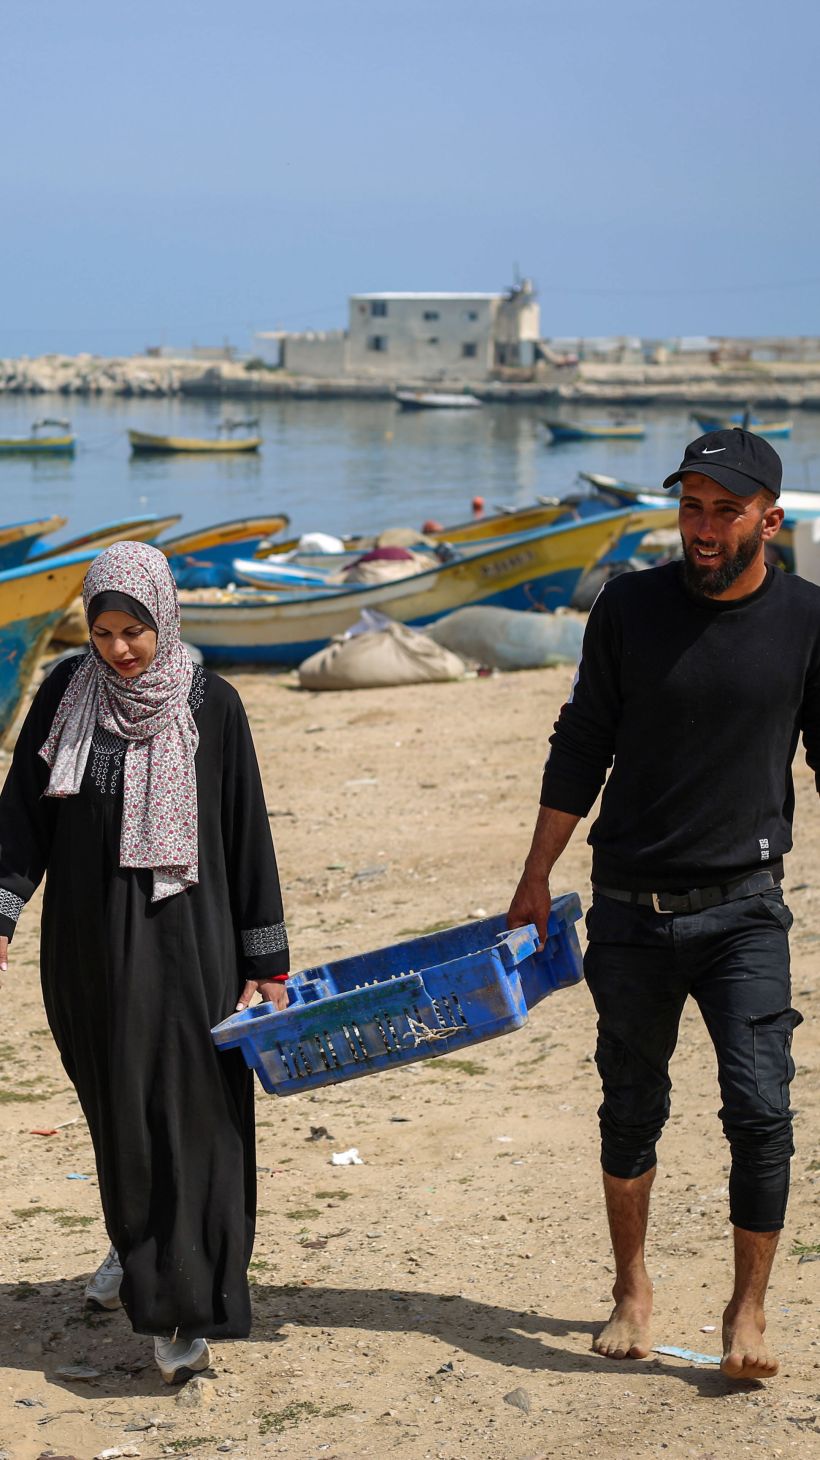 Khadr and Madleine walk on the beach with a blue basket of fish between them